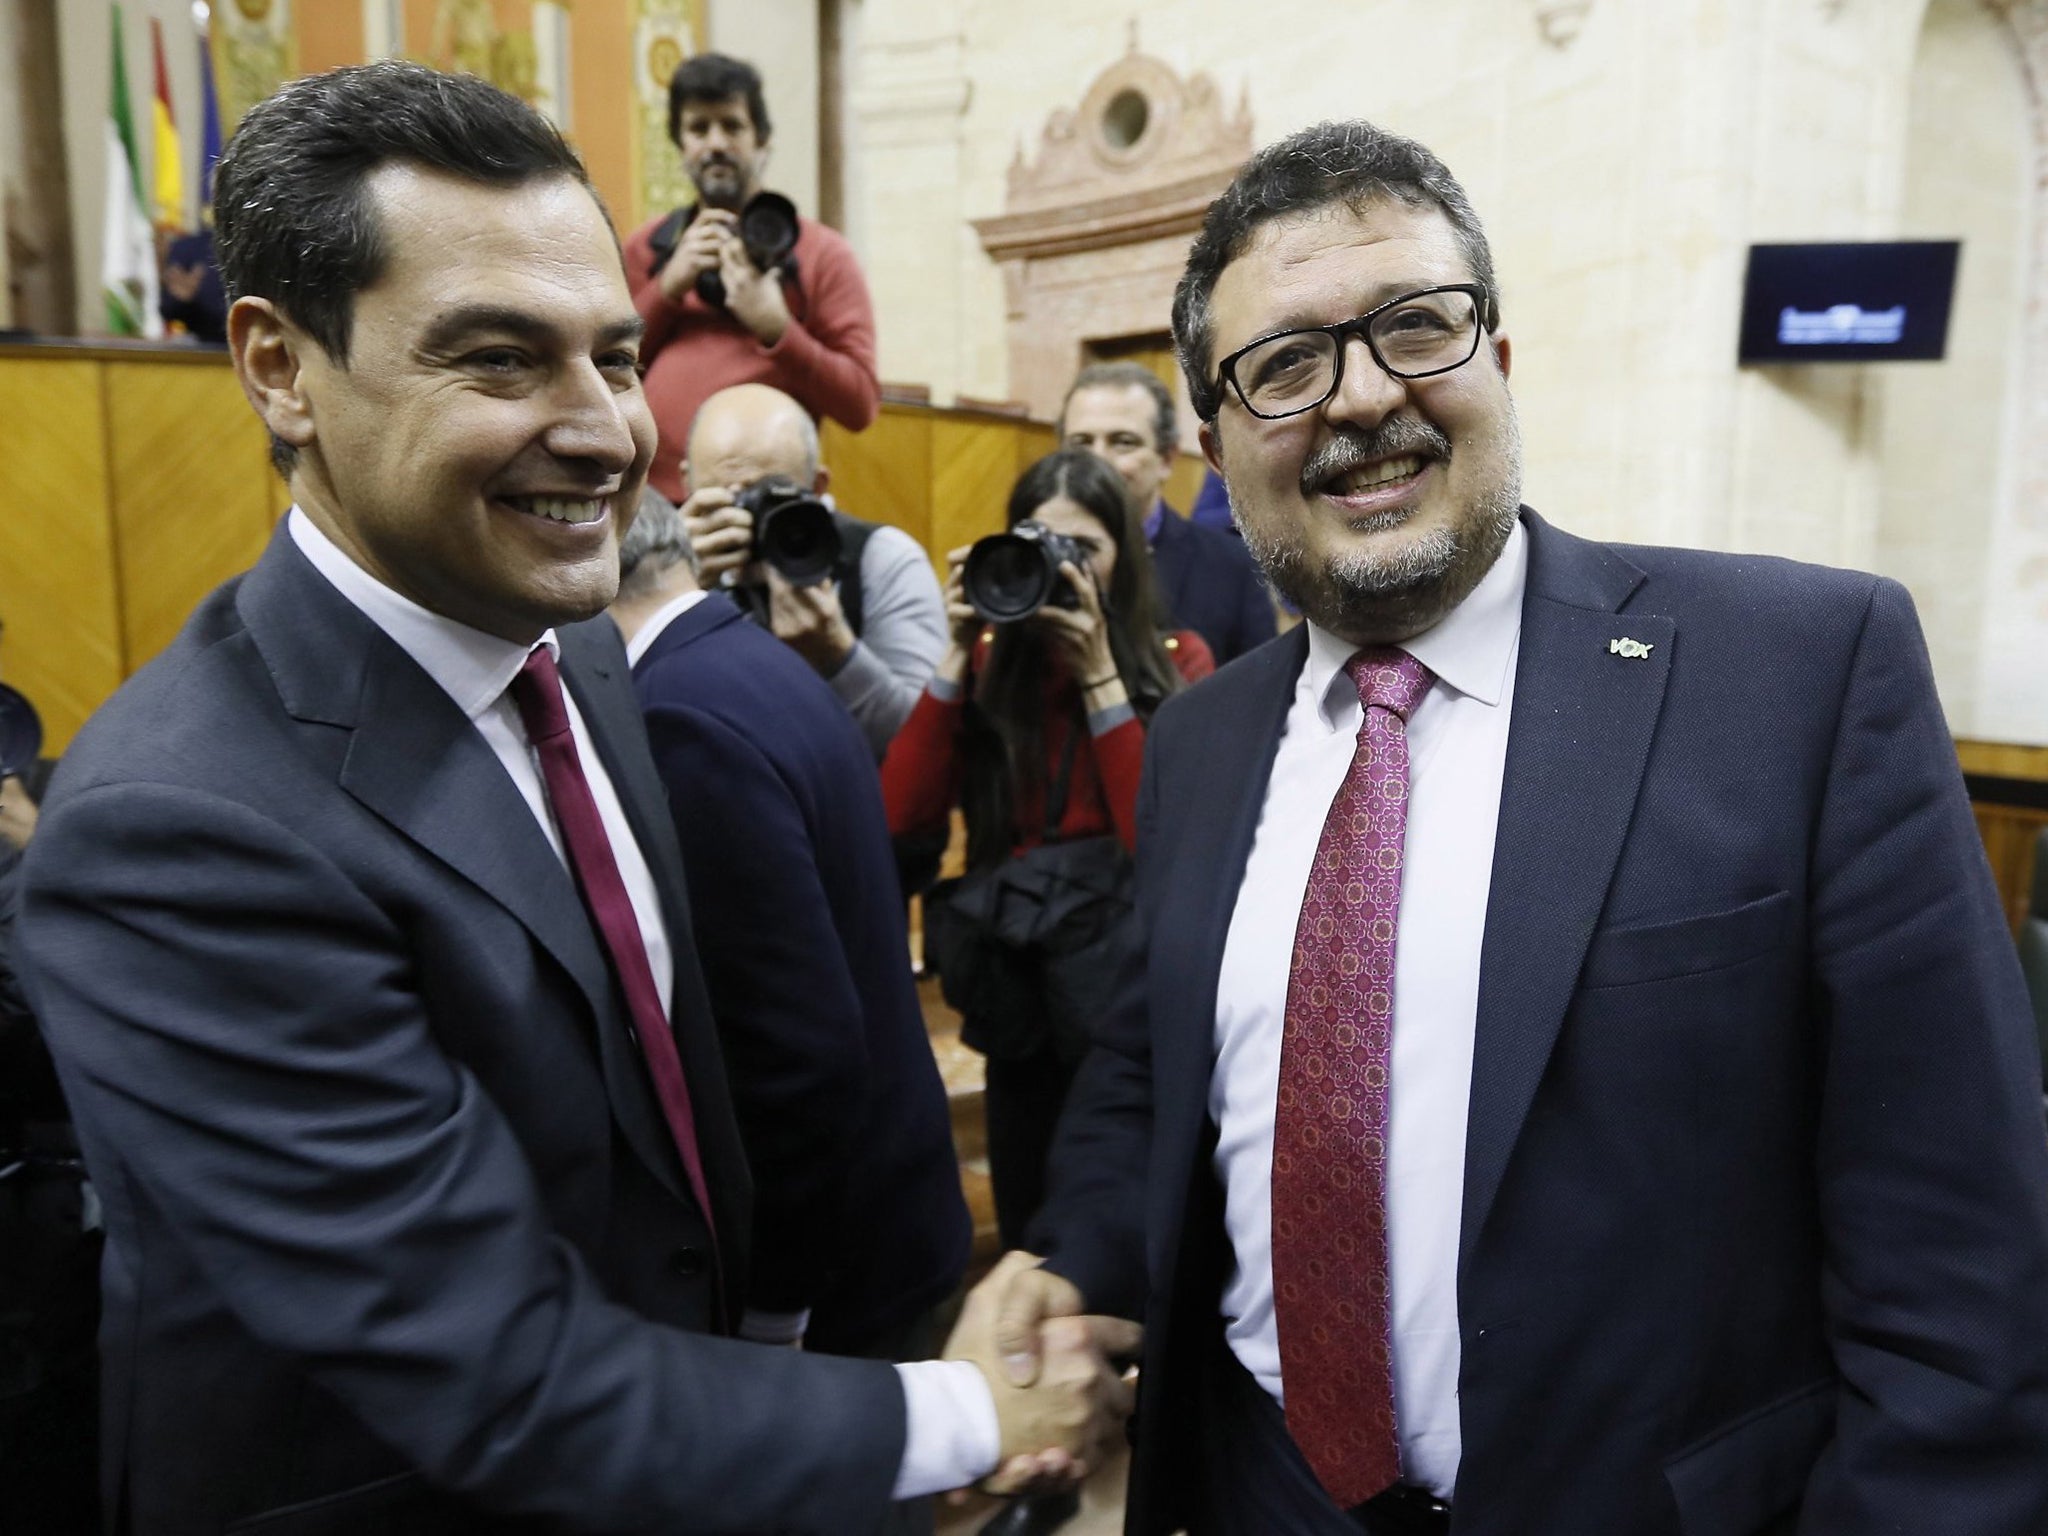 New Andalucian regional president Juanma Moreno (left) is congratulated by far-right party Vox’s spokesperson Francisco Serrano at Andalusian parliament in Seville